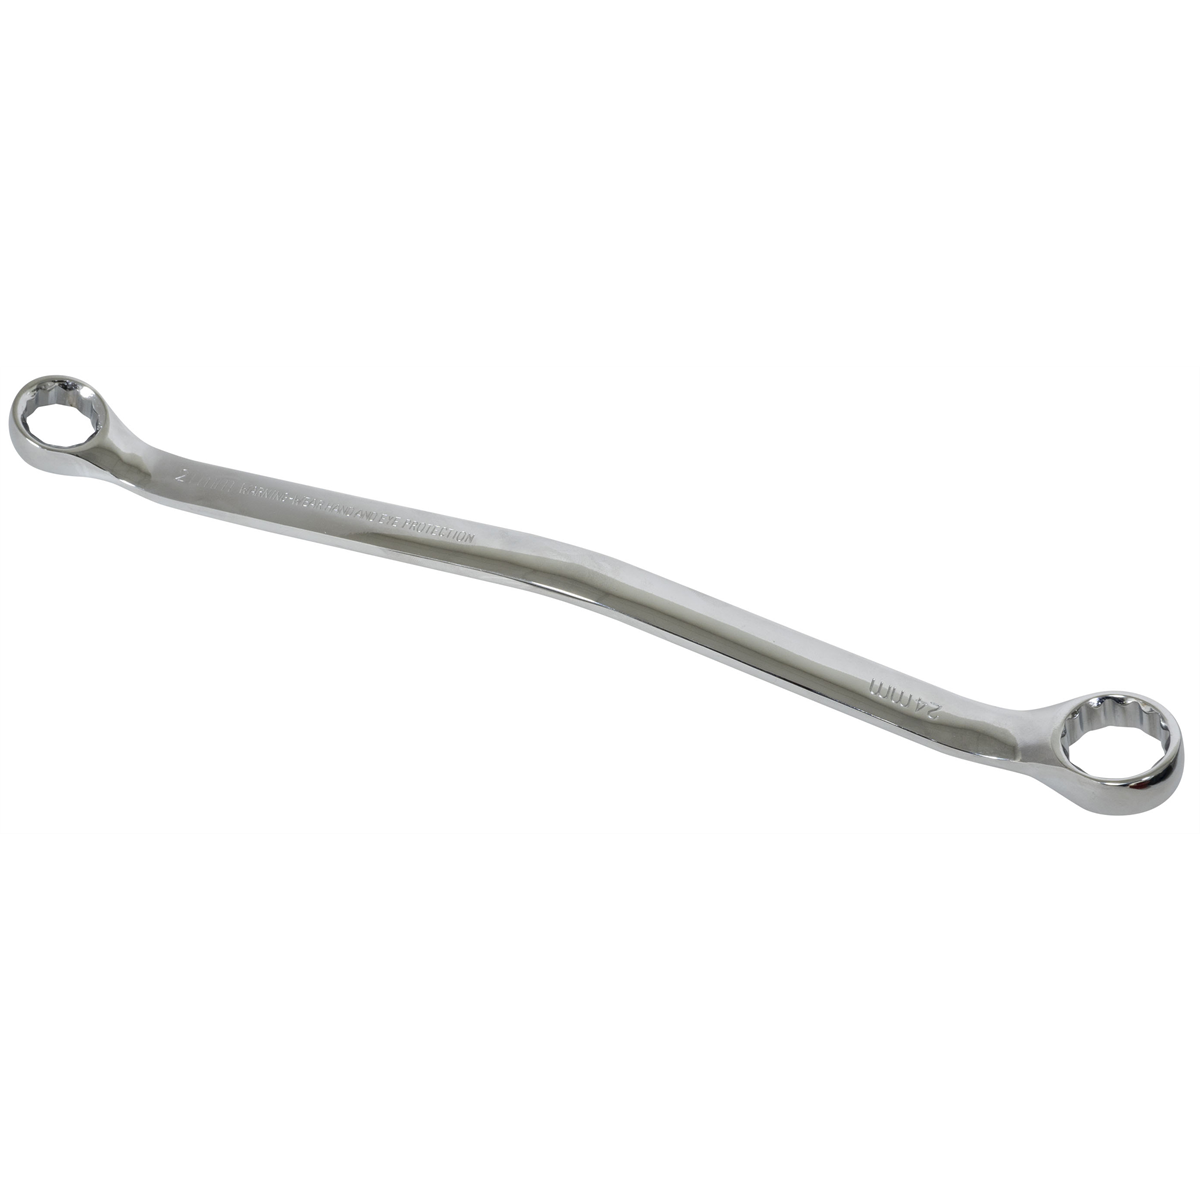 "CASTER CAMBER WRENCH, 21M